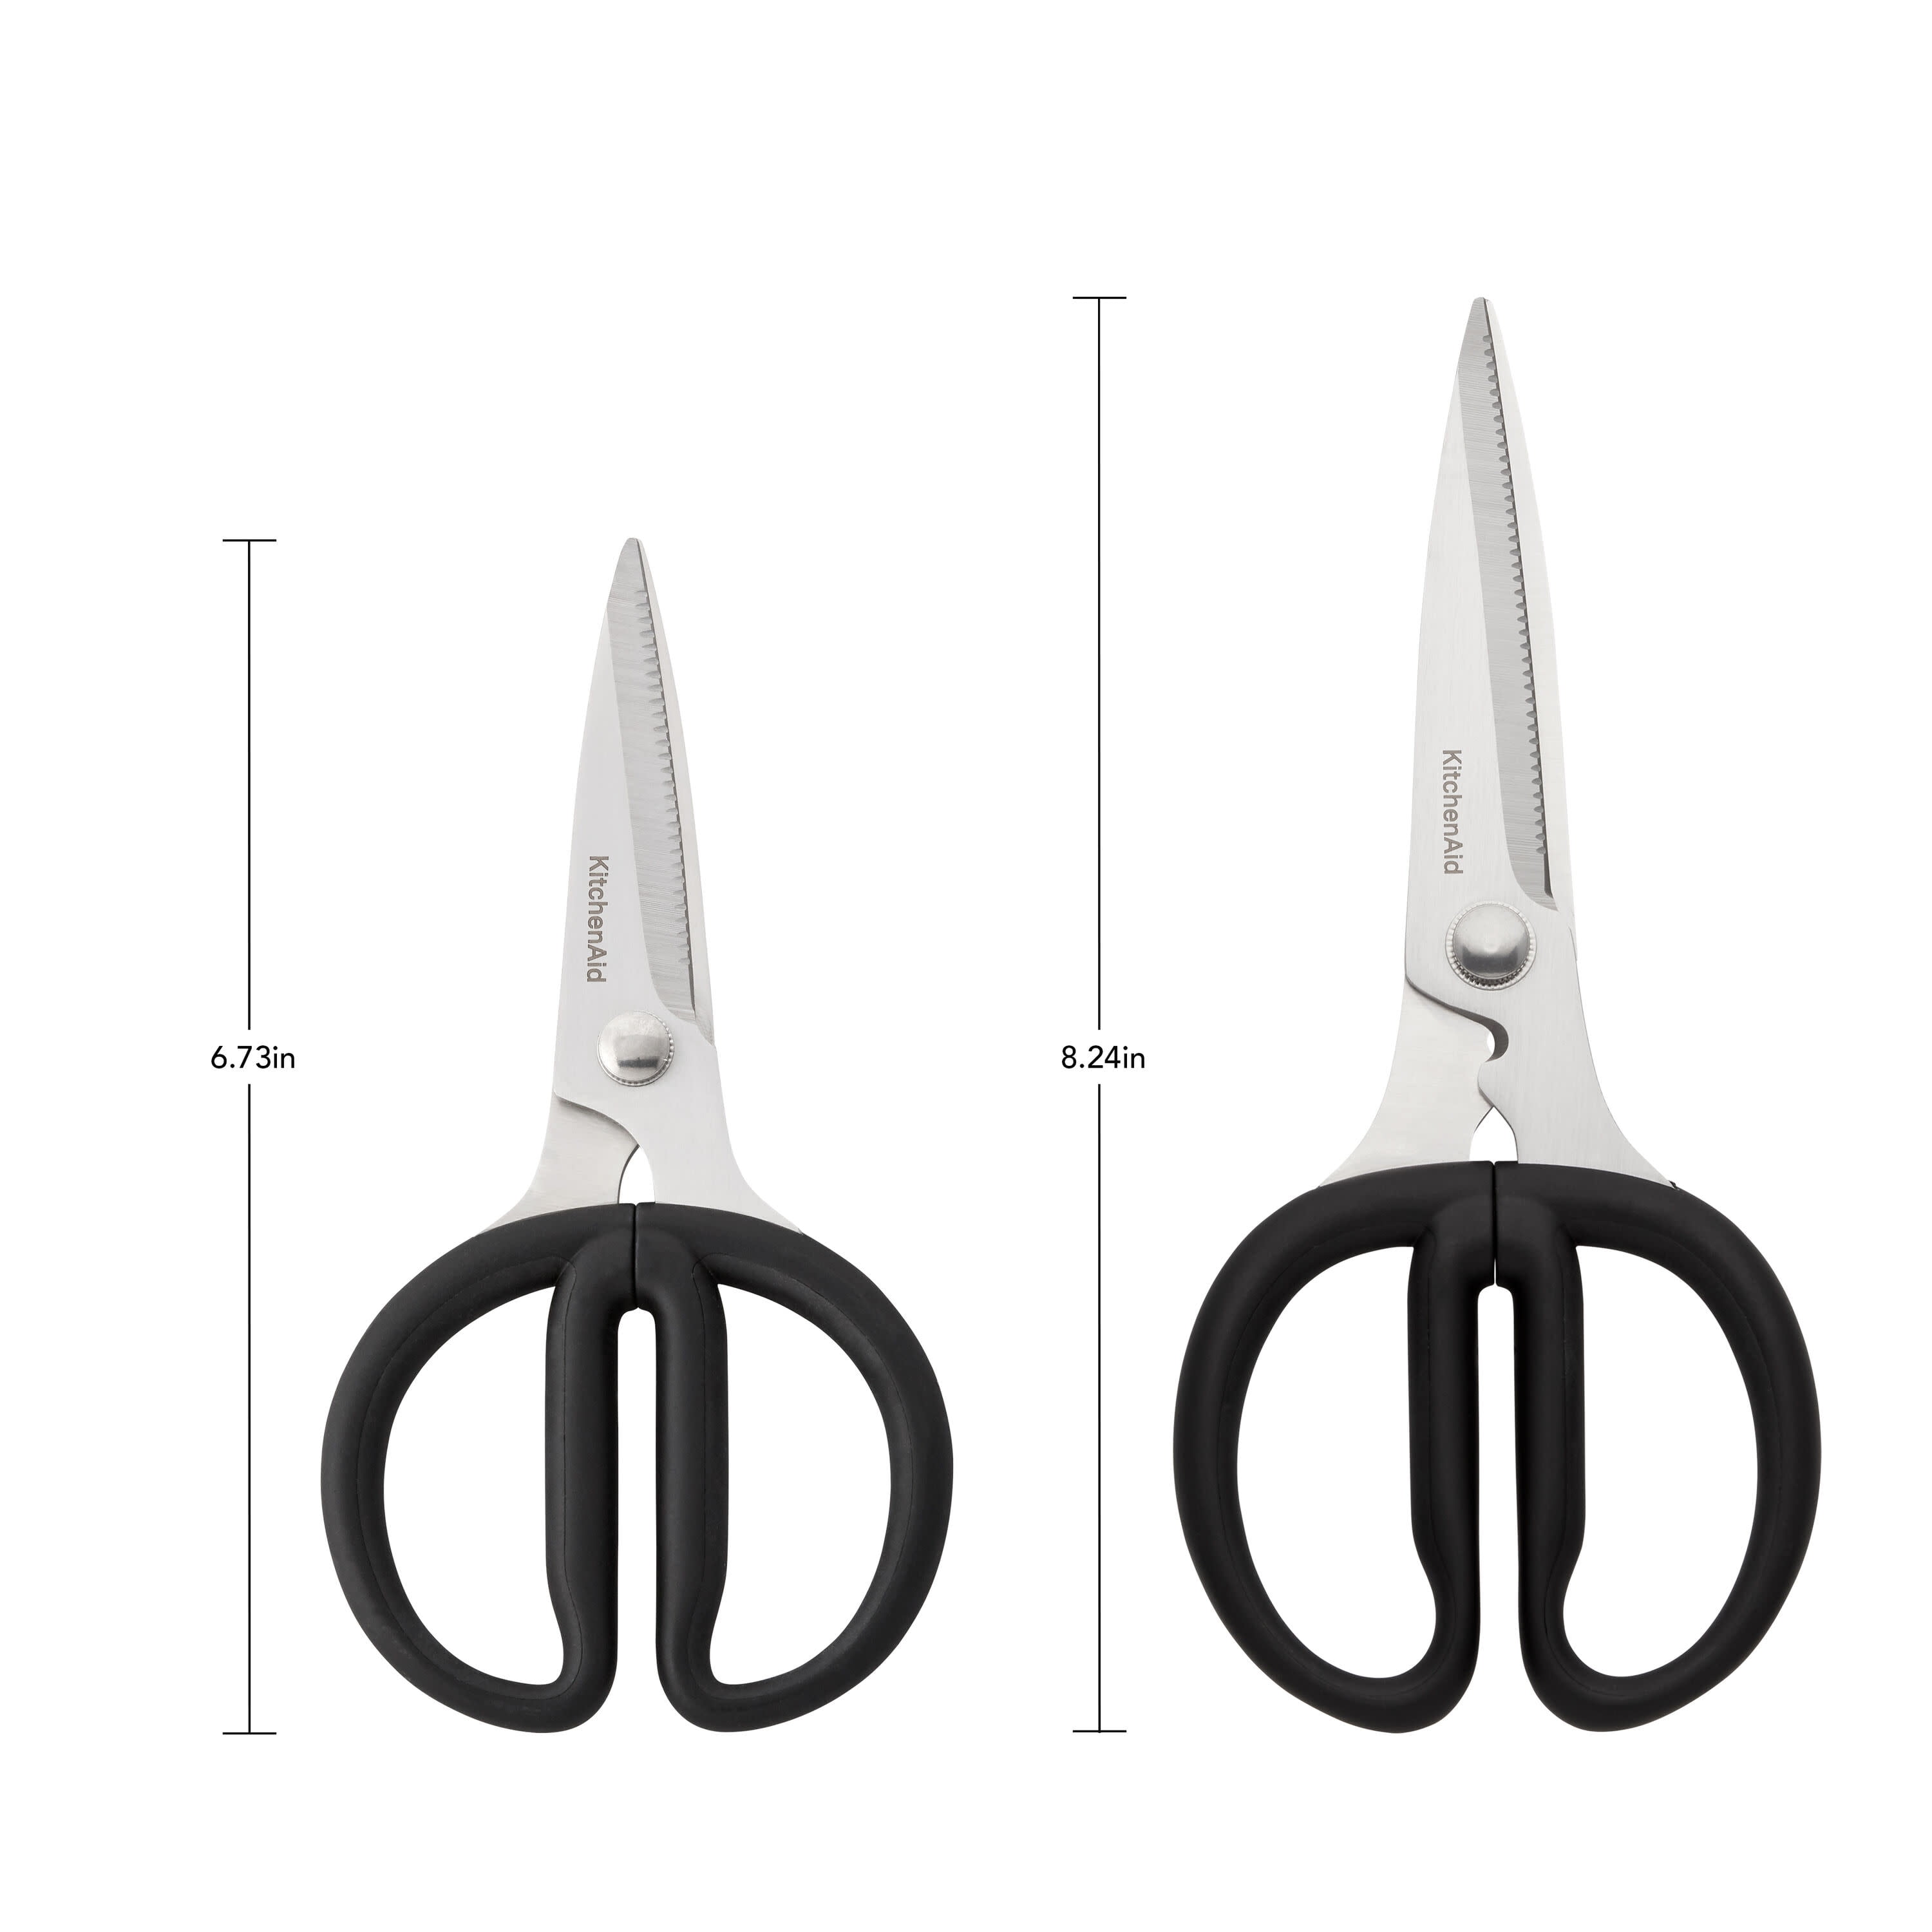 Kitchenaid Universal Stainless Steel Bent Shears in Black 